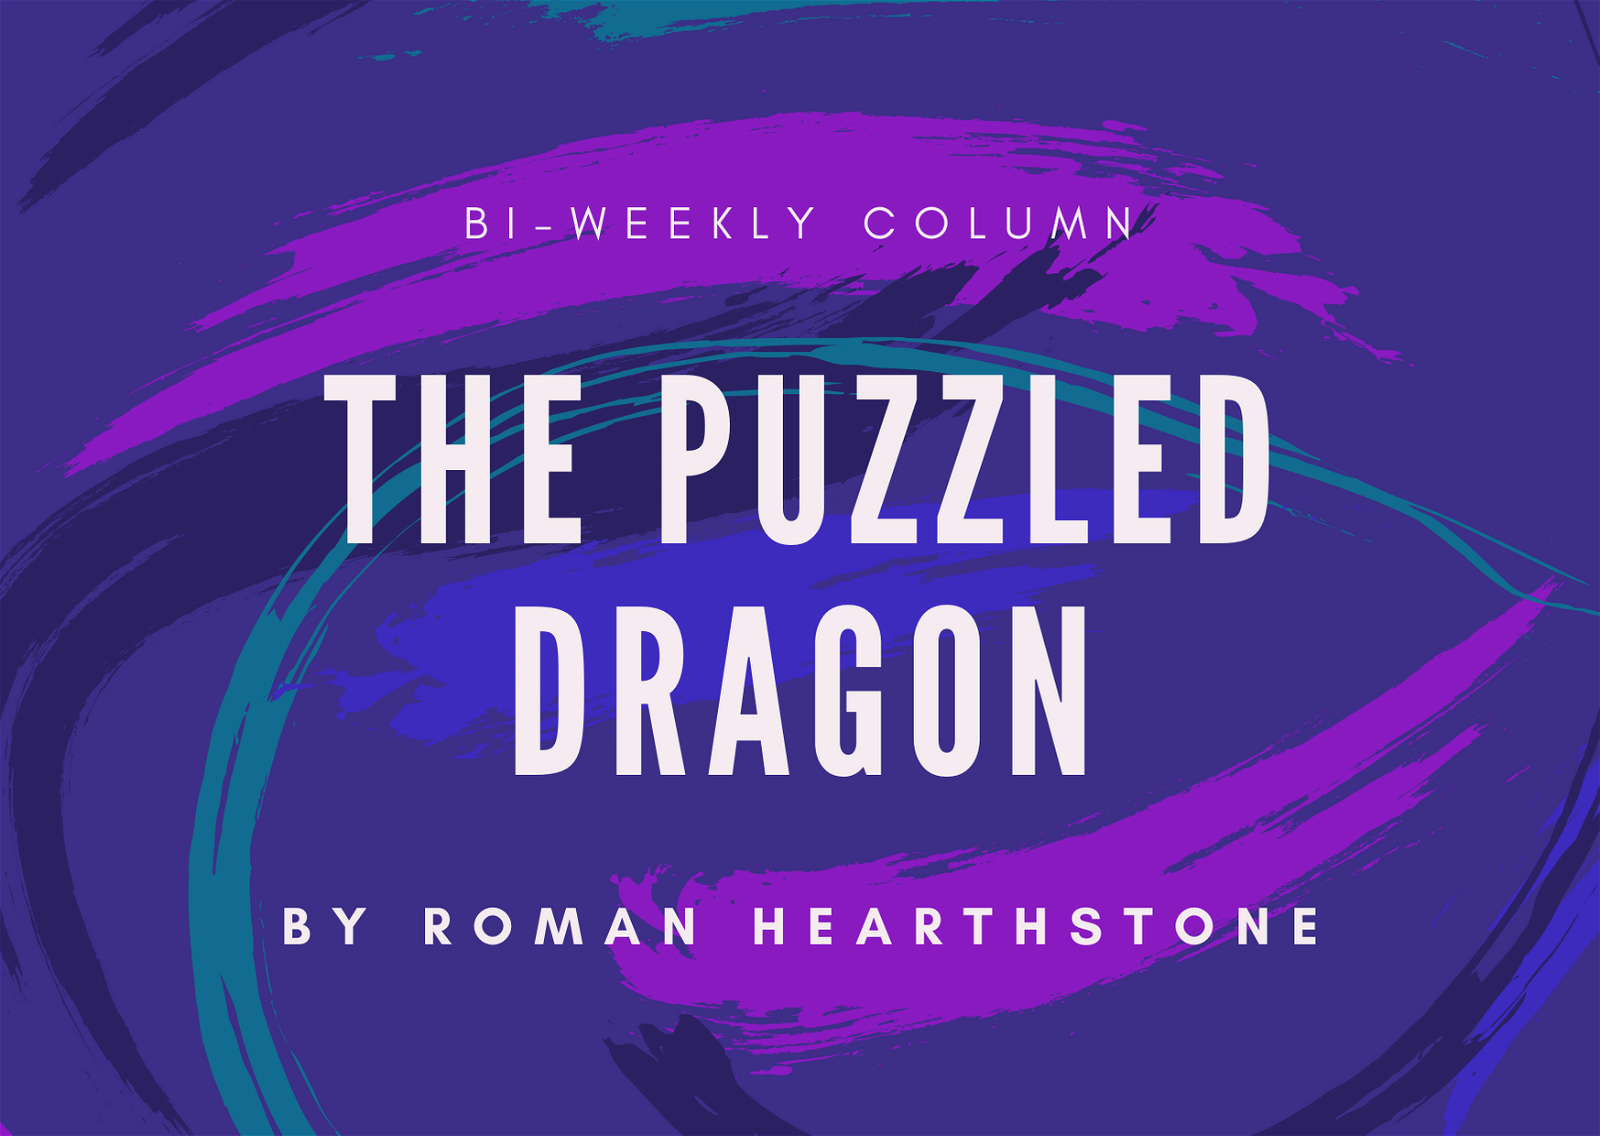 The Puzzled Dragon!